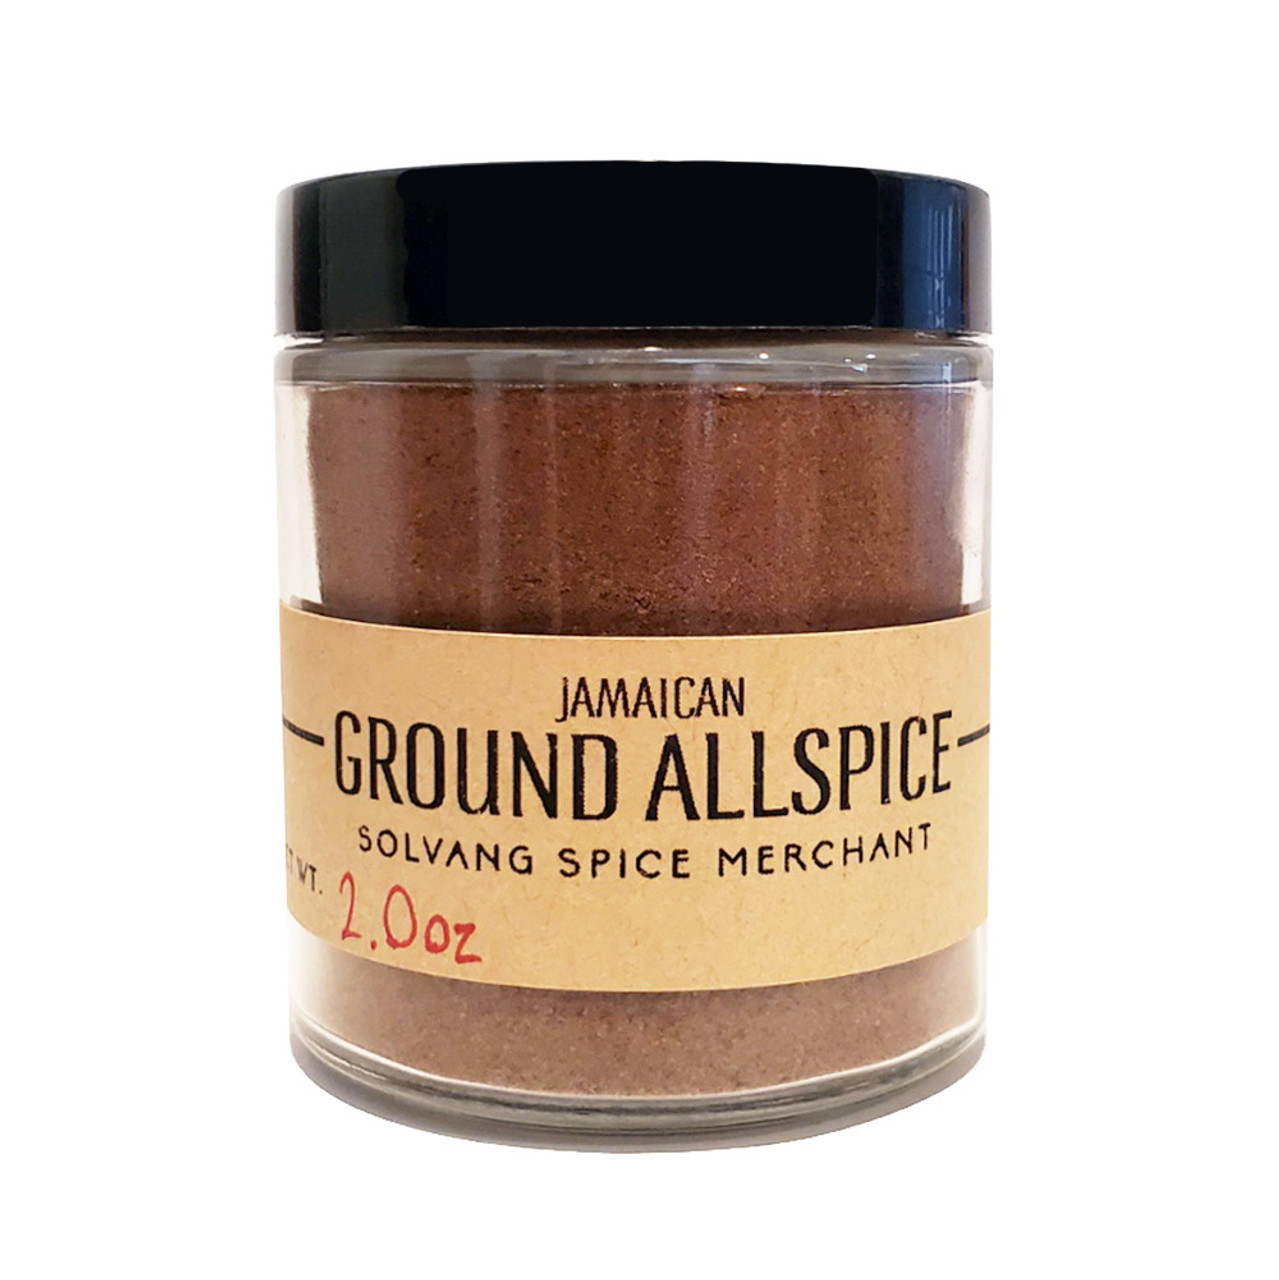 https://cdn11.bigcommerce.com/s-olcbq833v8/images/stencil/1280x1280/products/438/1234/allspice-ground-jamaican-1__68402.1701032487.jpg?c=2